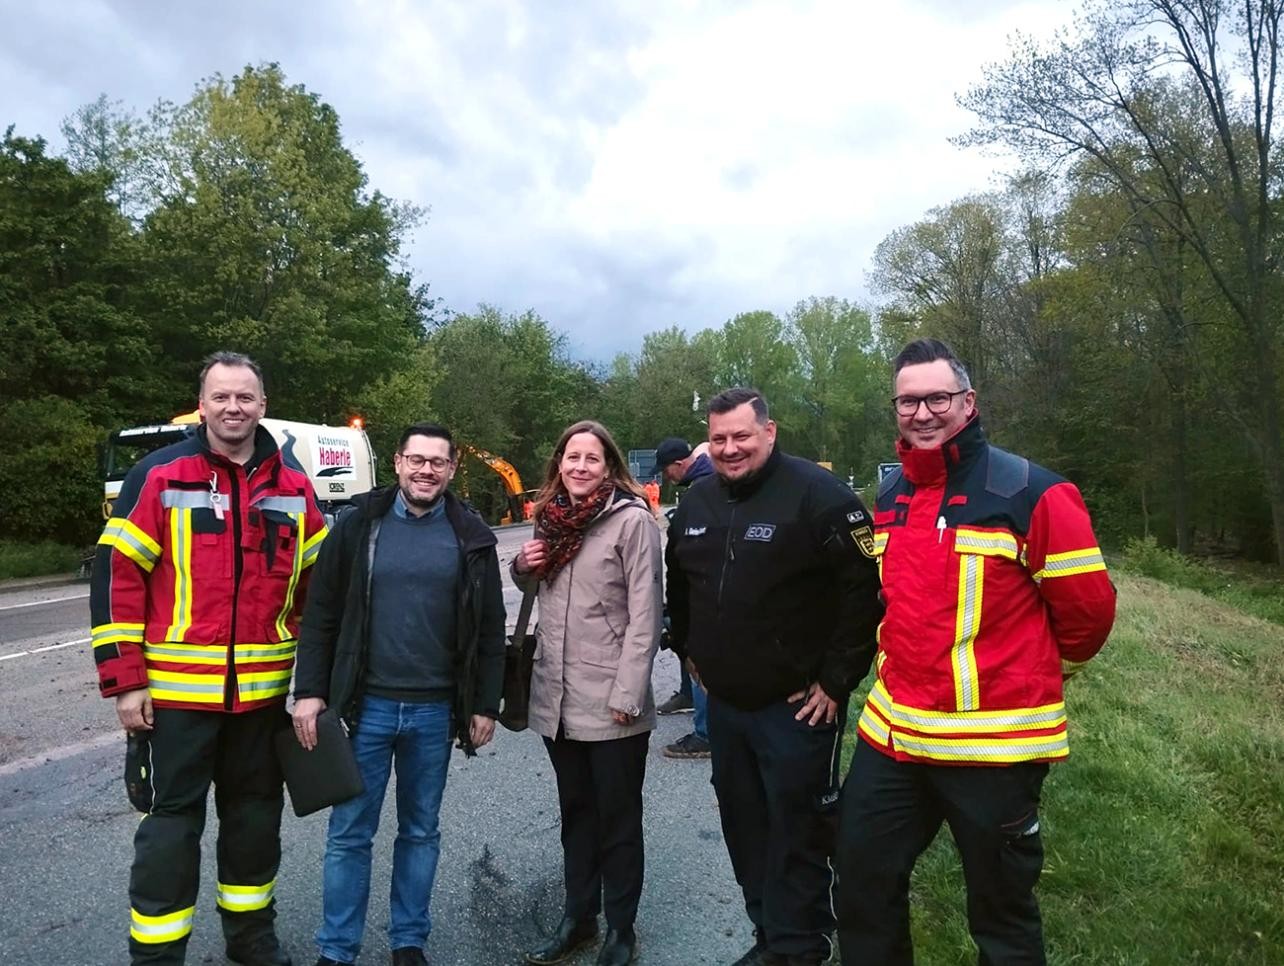 Group photo of Mayor Müller and emergency services at the site where the World War II bomb was found in Rastatt after the successful detonation